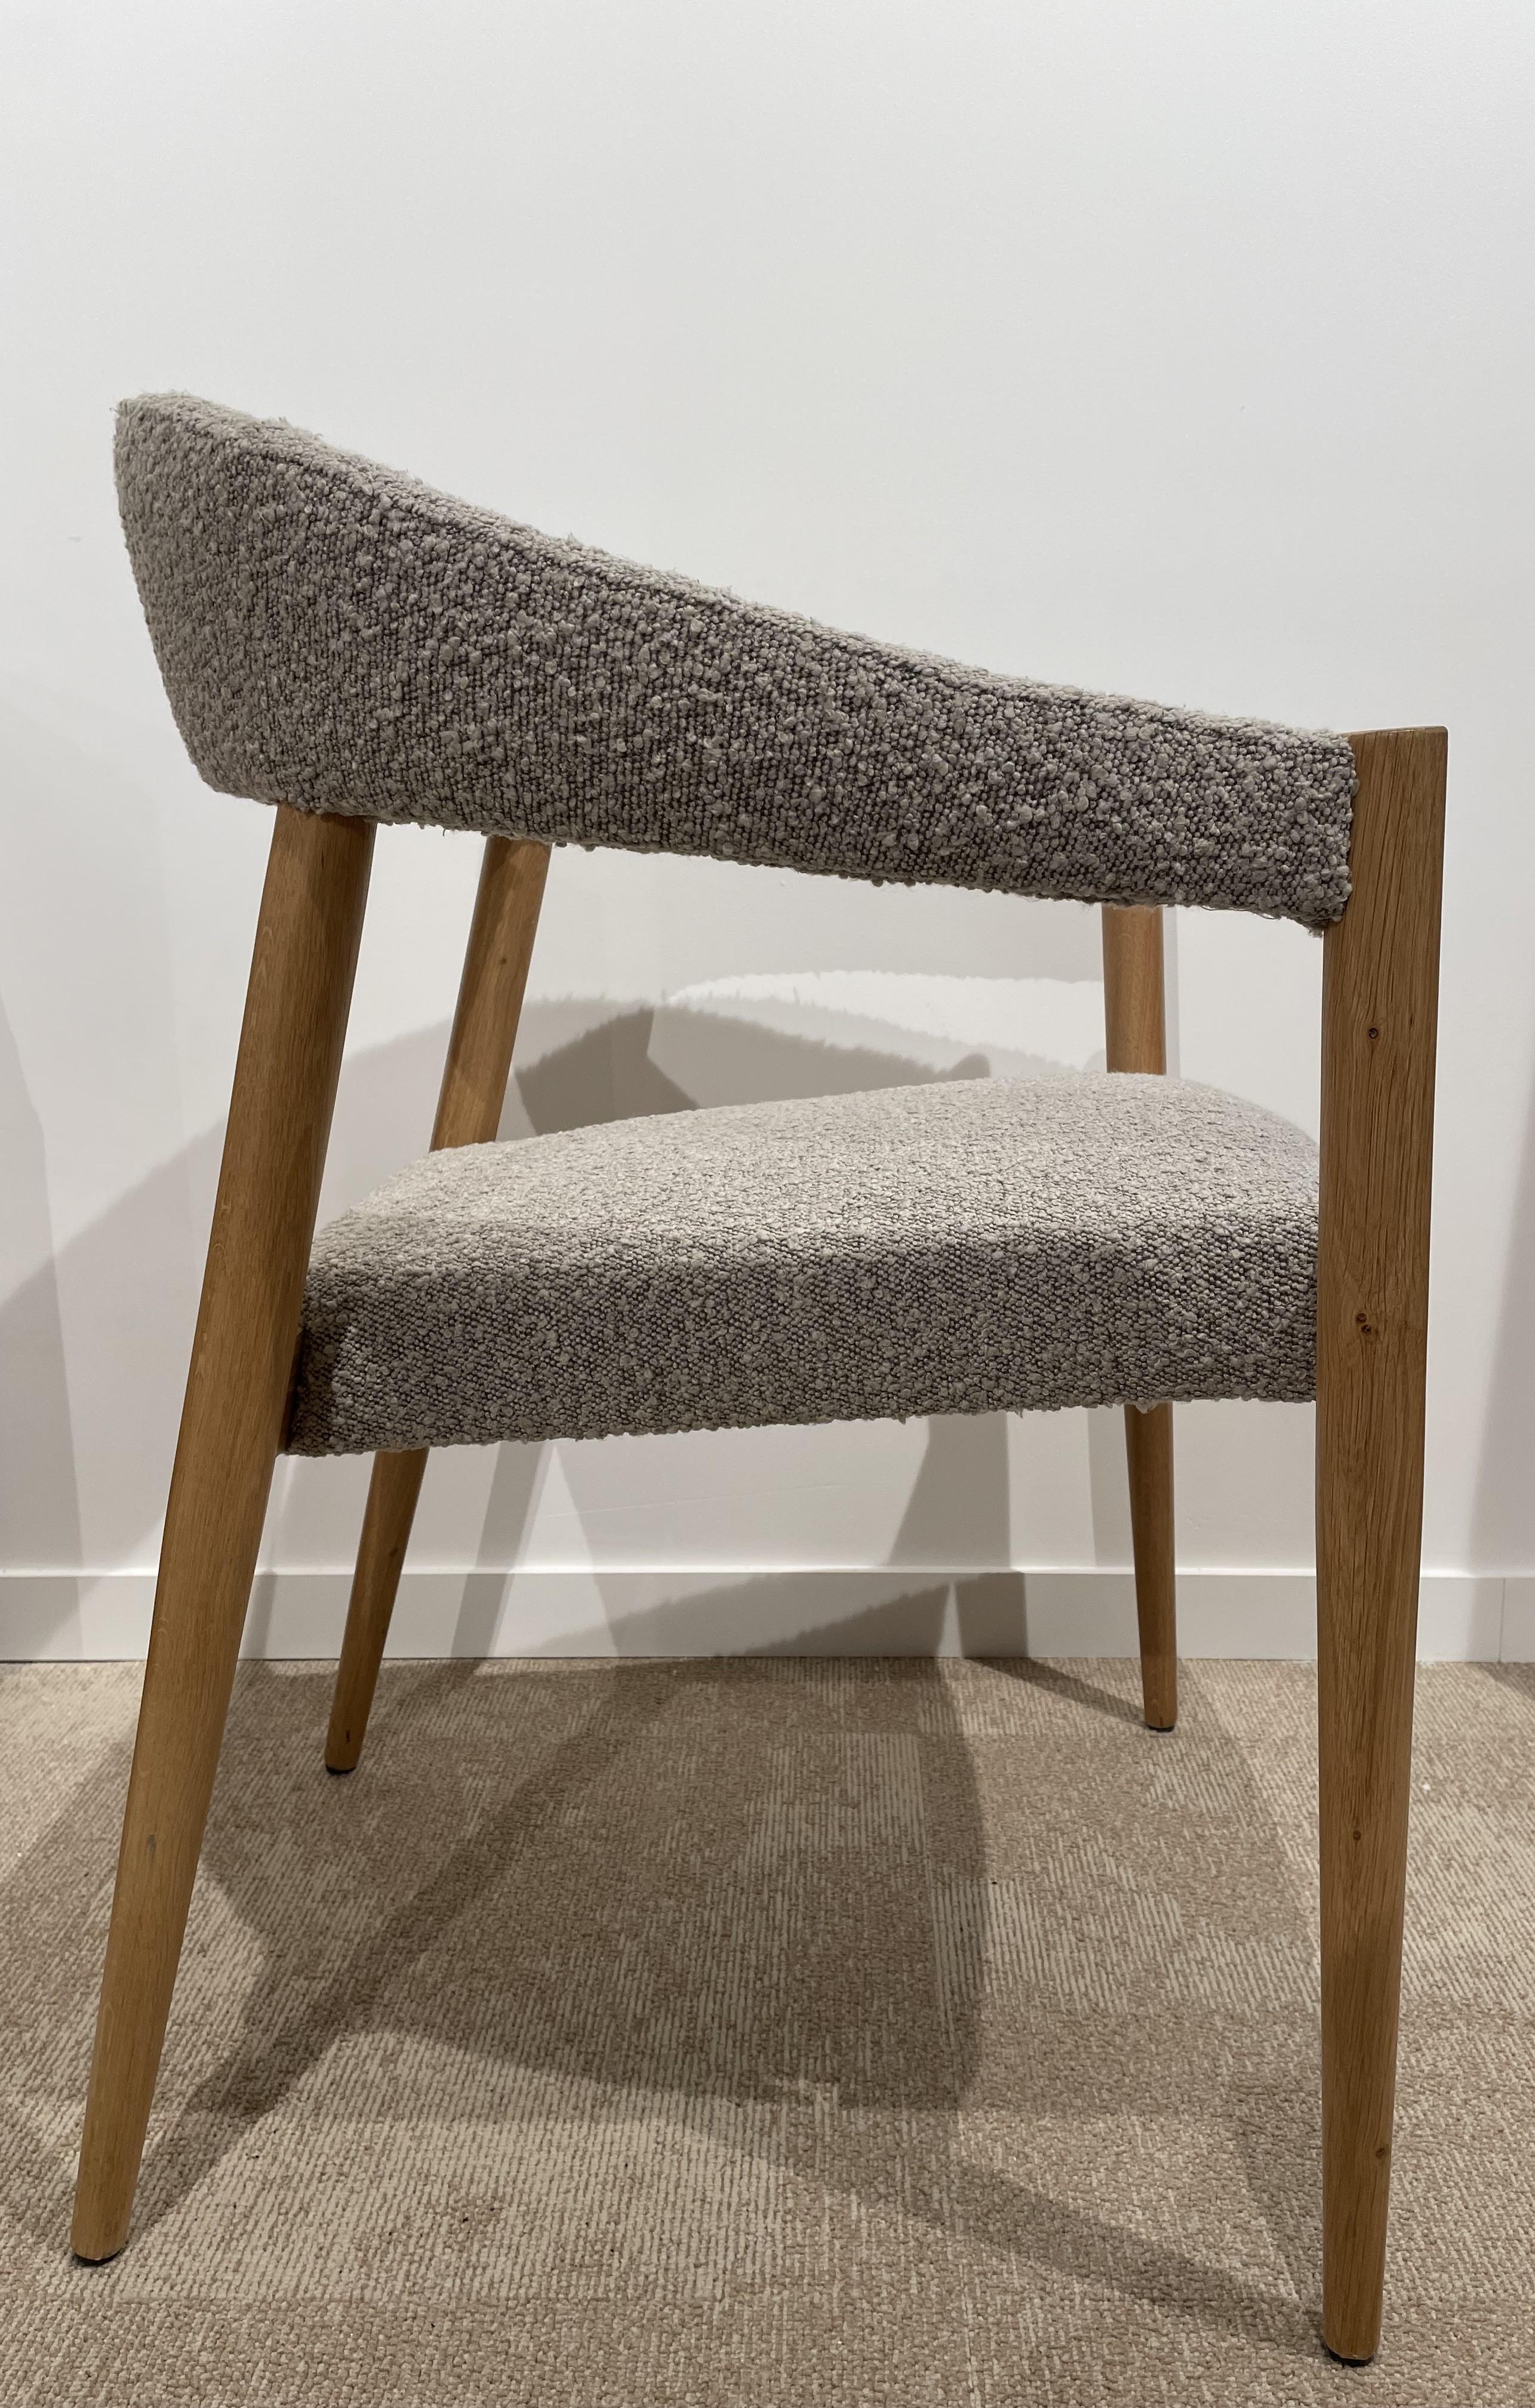 1960s Danish Design and Scandinavian style wooden and grey Bouclé fabric chair, around the dining table, it will be perfect in the office too!
  